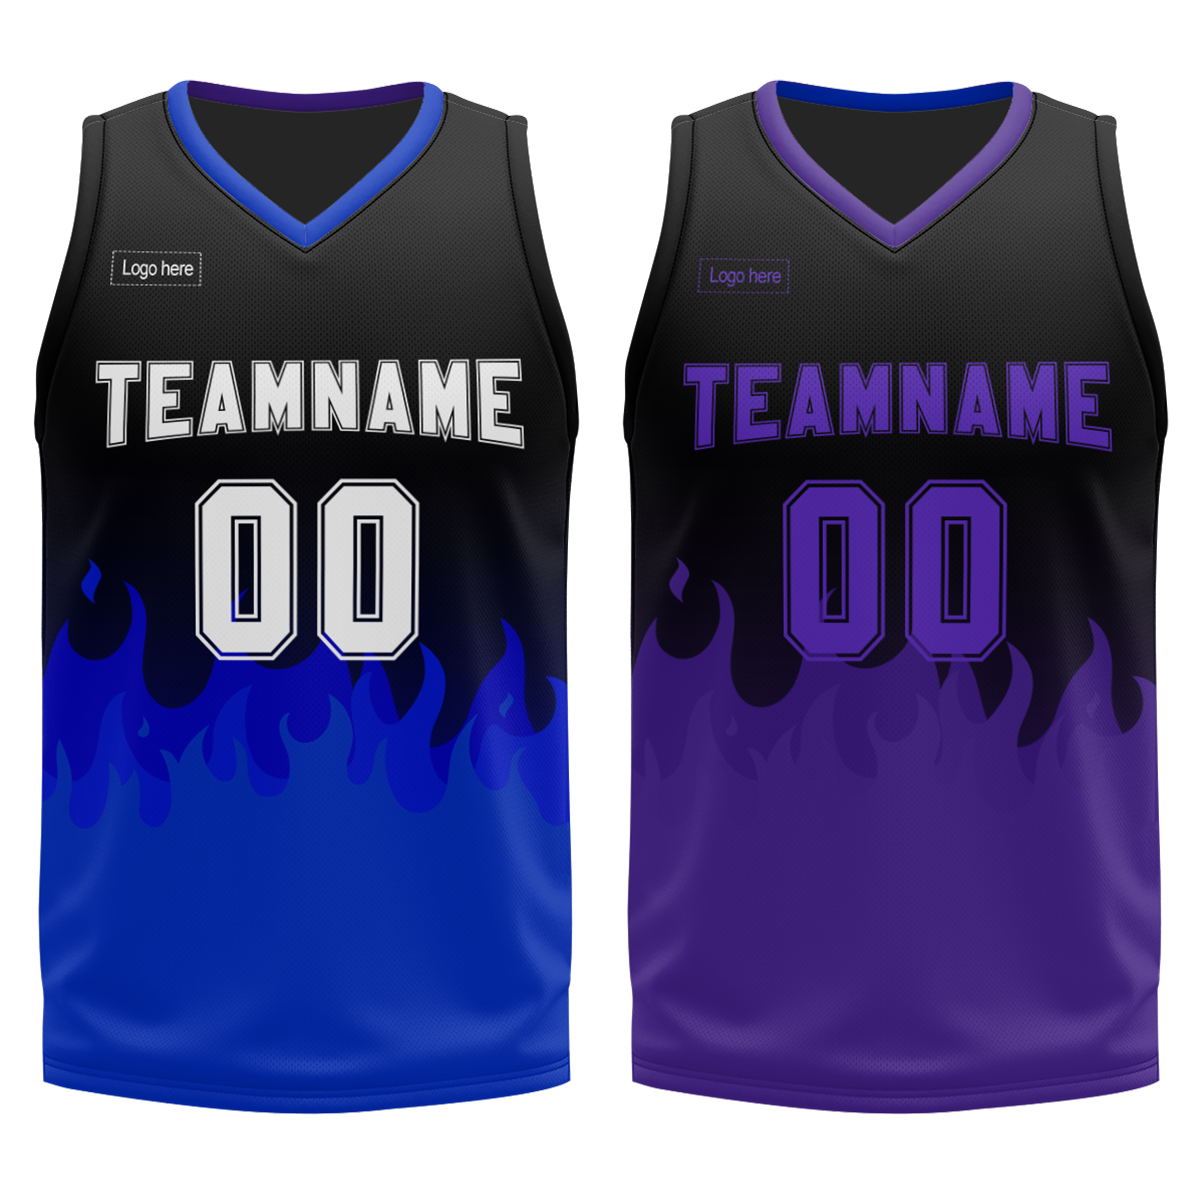 wholesales-reversible-basketball-jersey-custom-personalized-print-your-name-number-basketball-team-uniform-shirts-for-adult-at-cj-pod-4